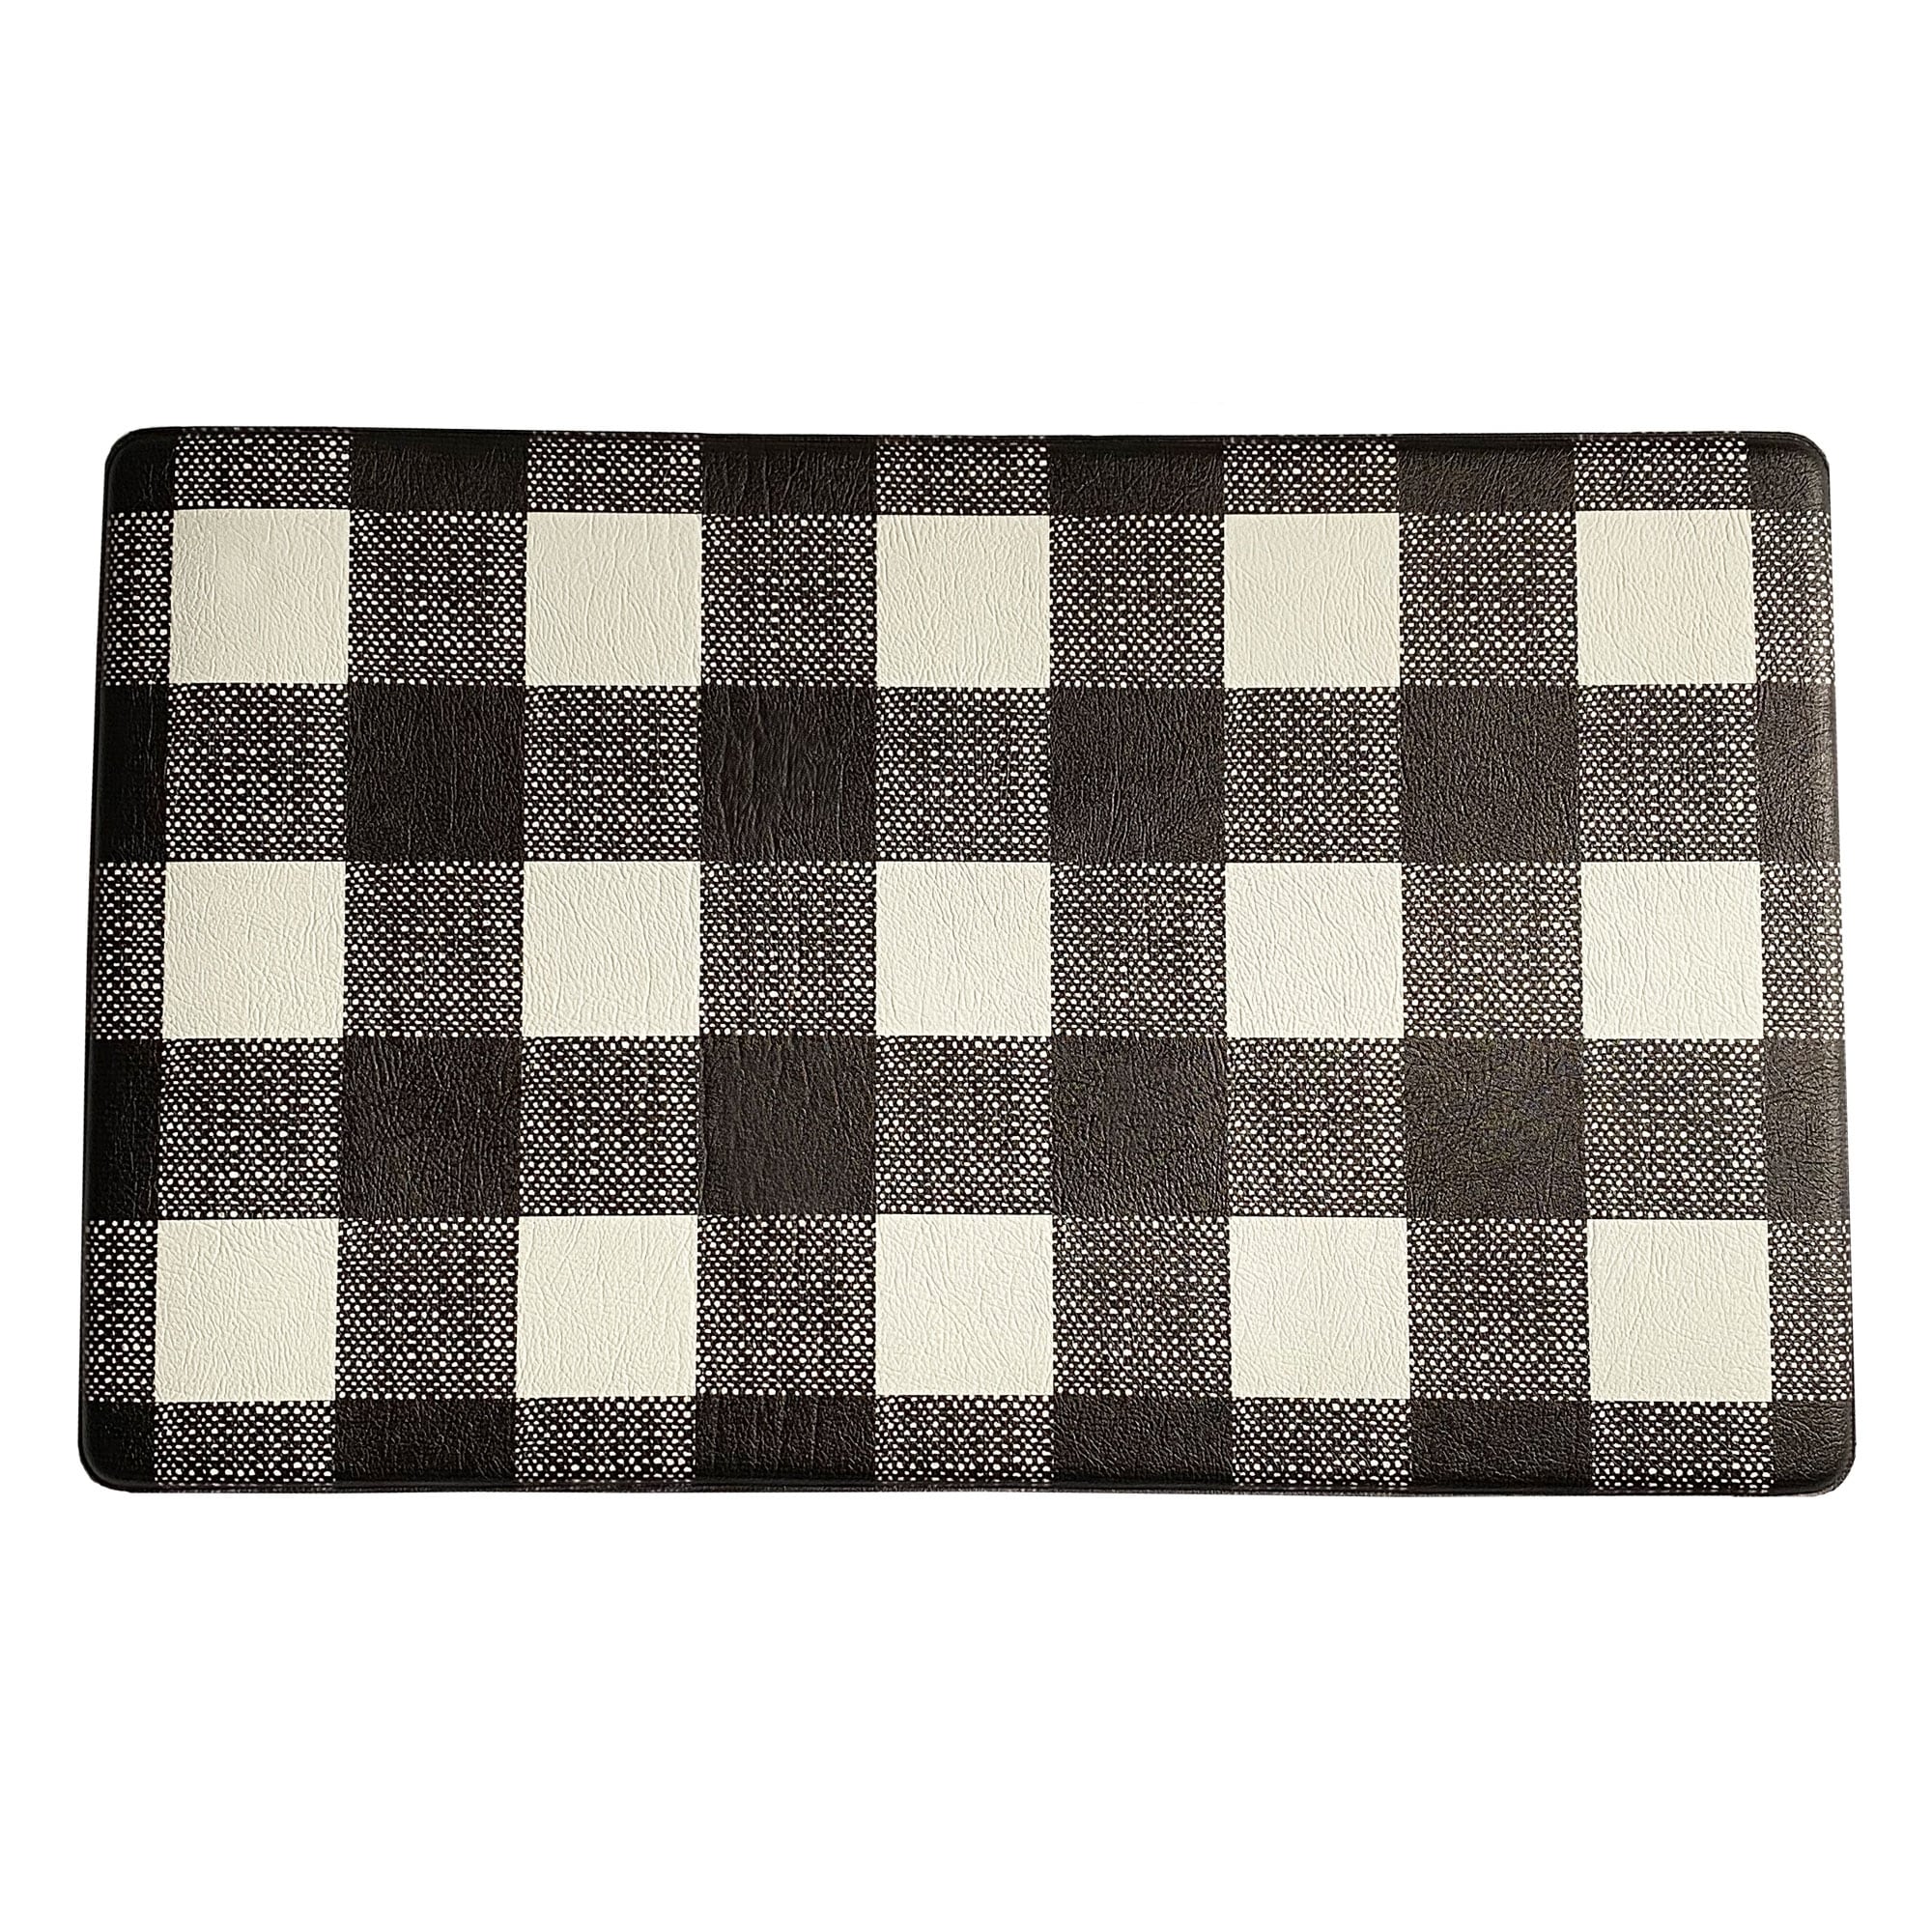 Black and White Buffalo Check Bag - Farmhouse Is My Style